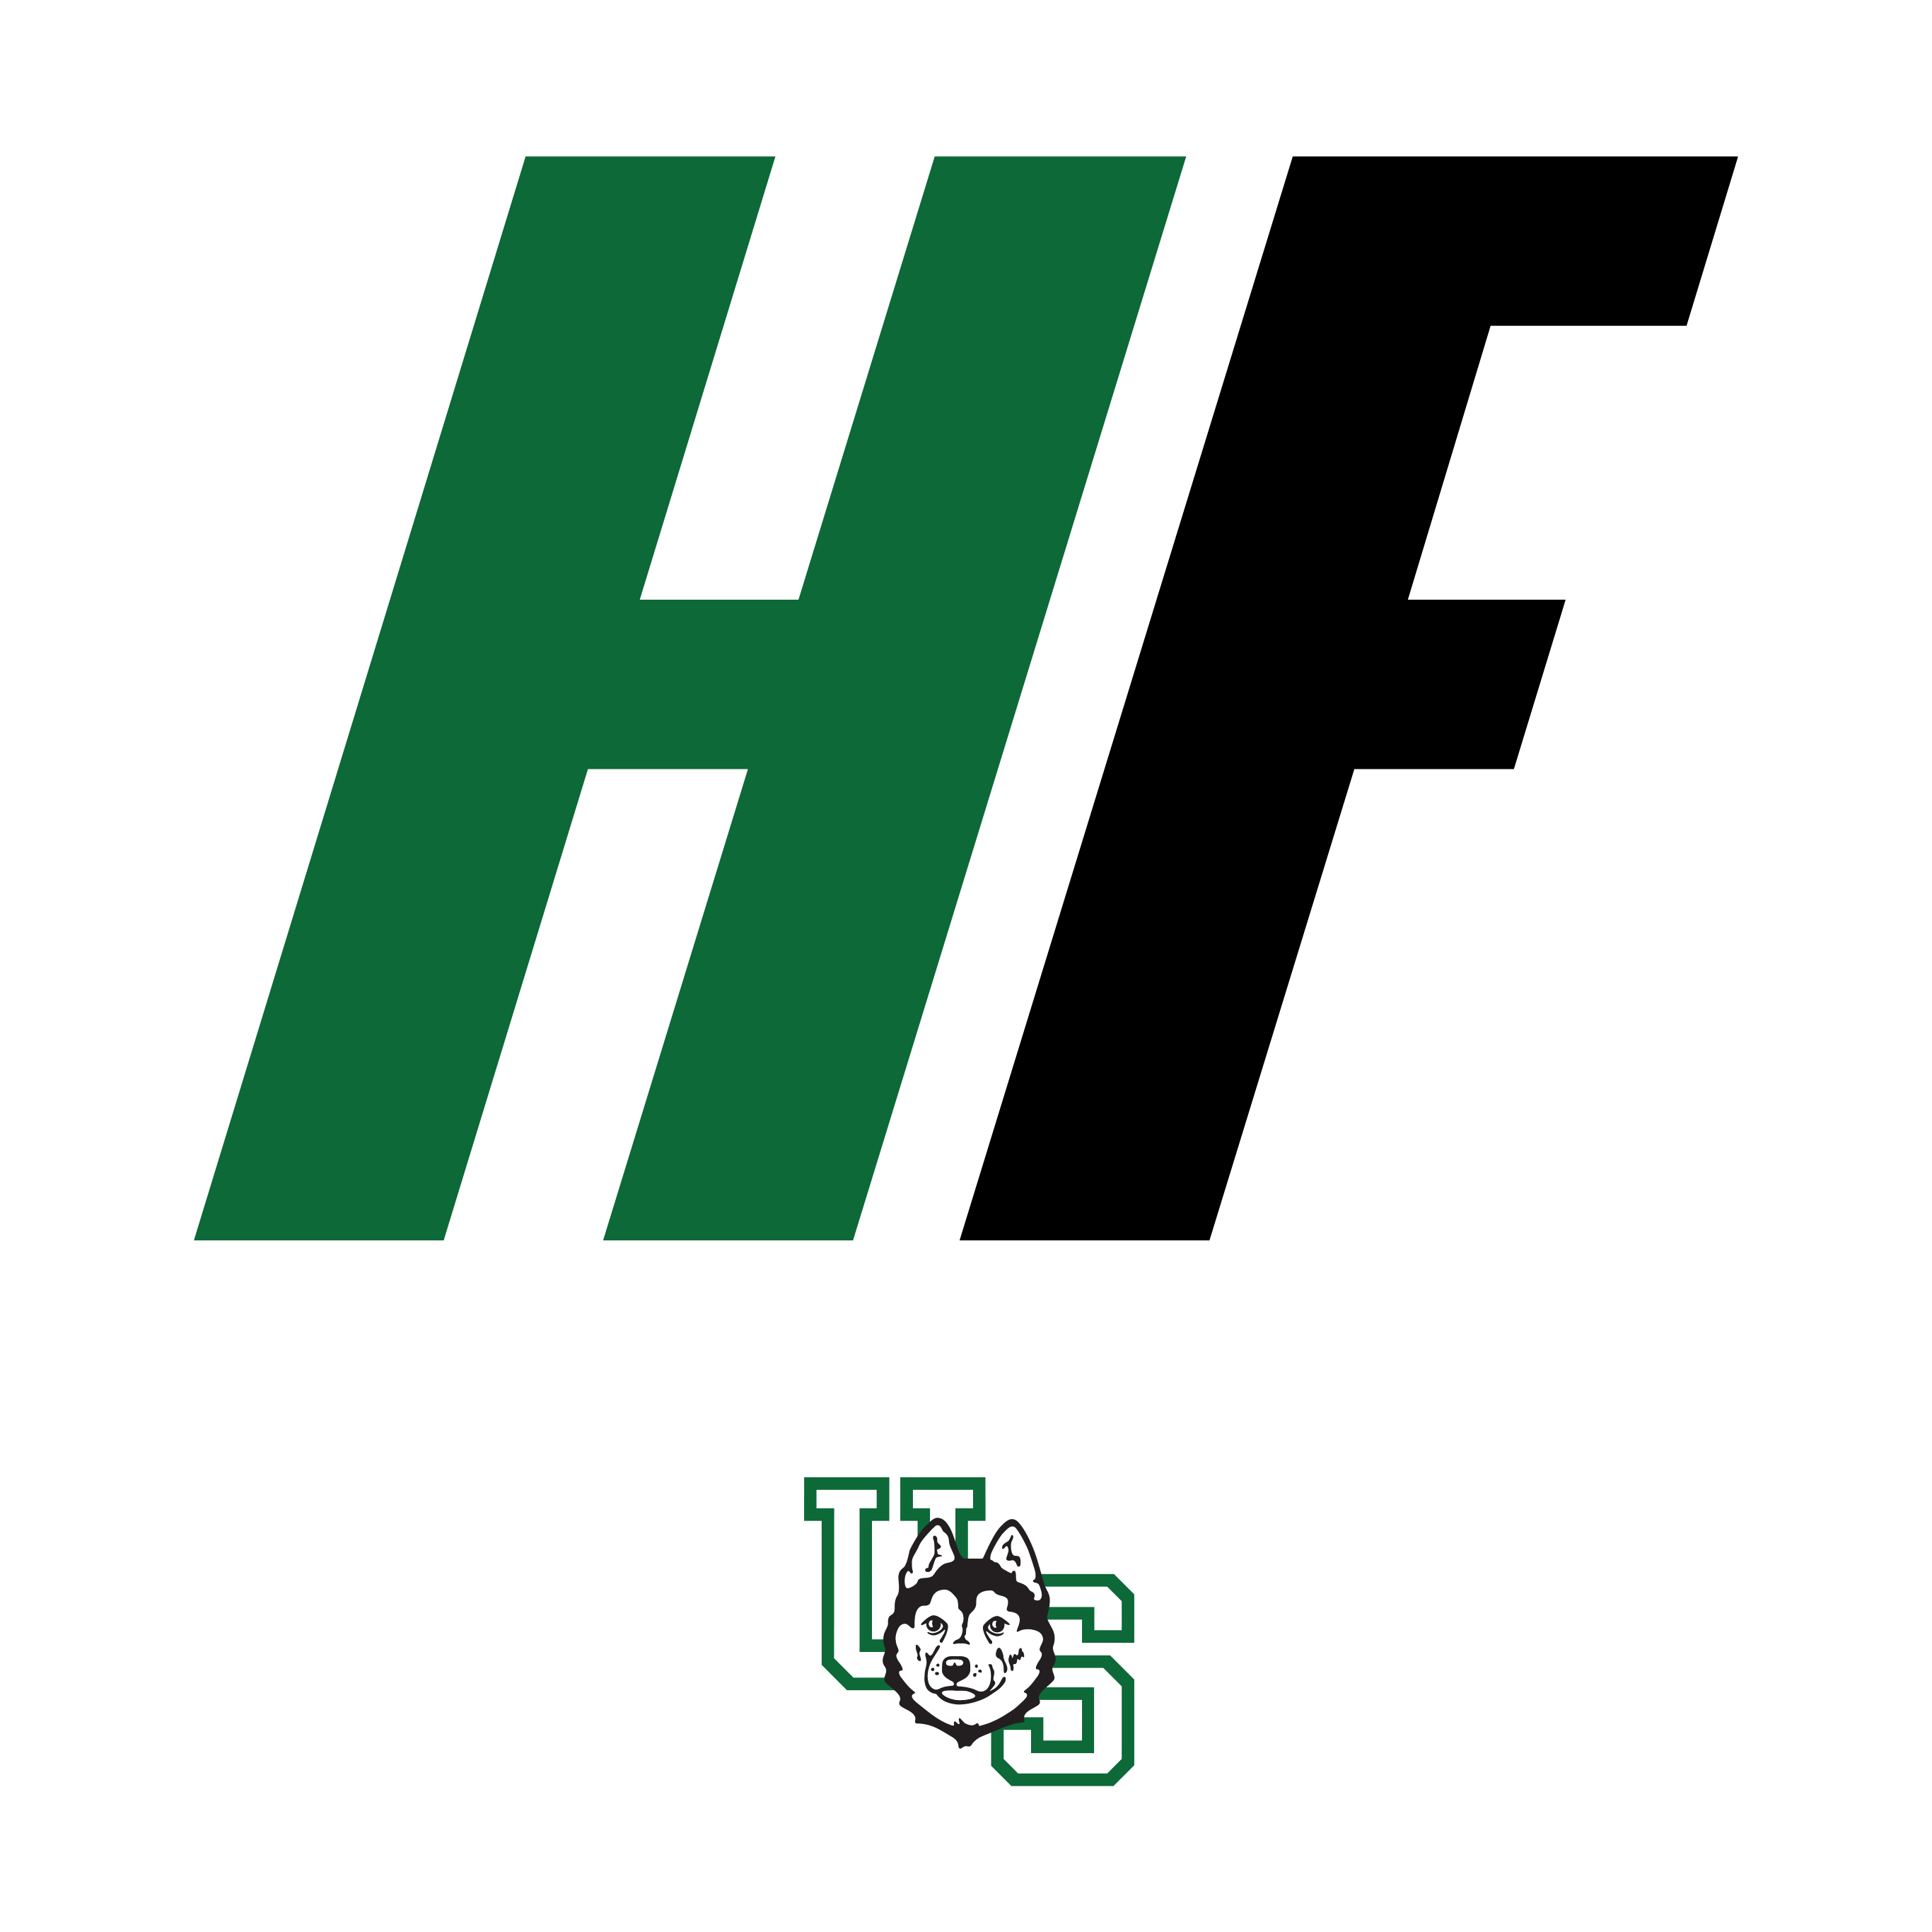 HuskieFAN Podcast – Coaches Show with Wray Morrison and Scott Flory (Nov. 17, 2021)